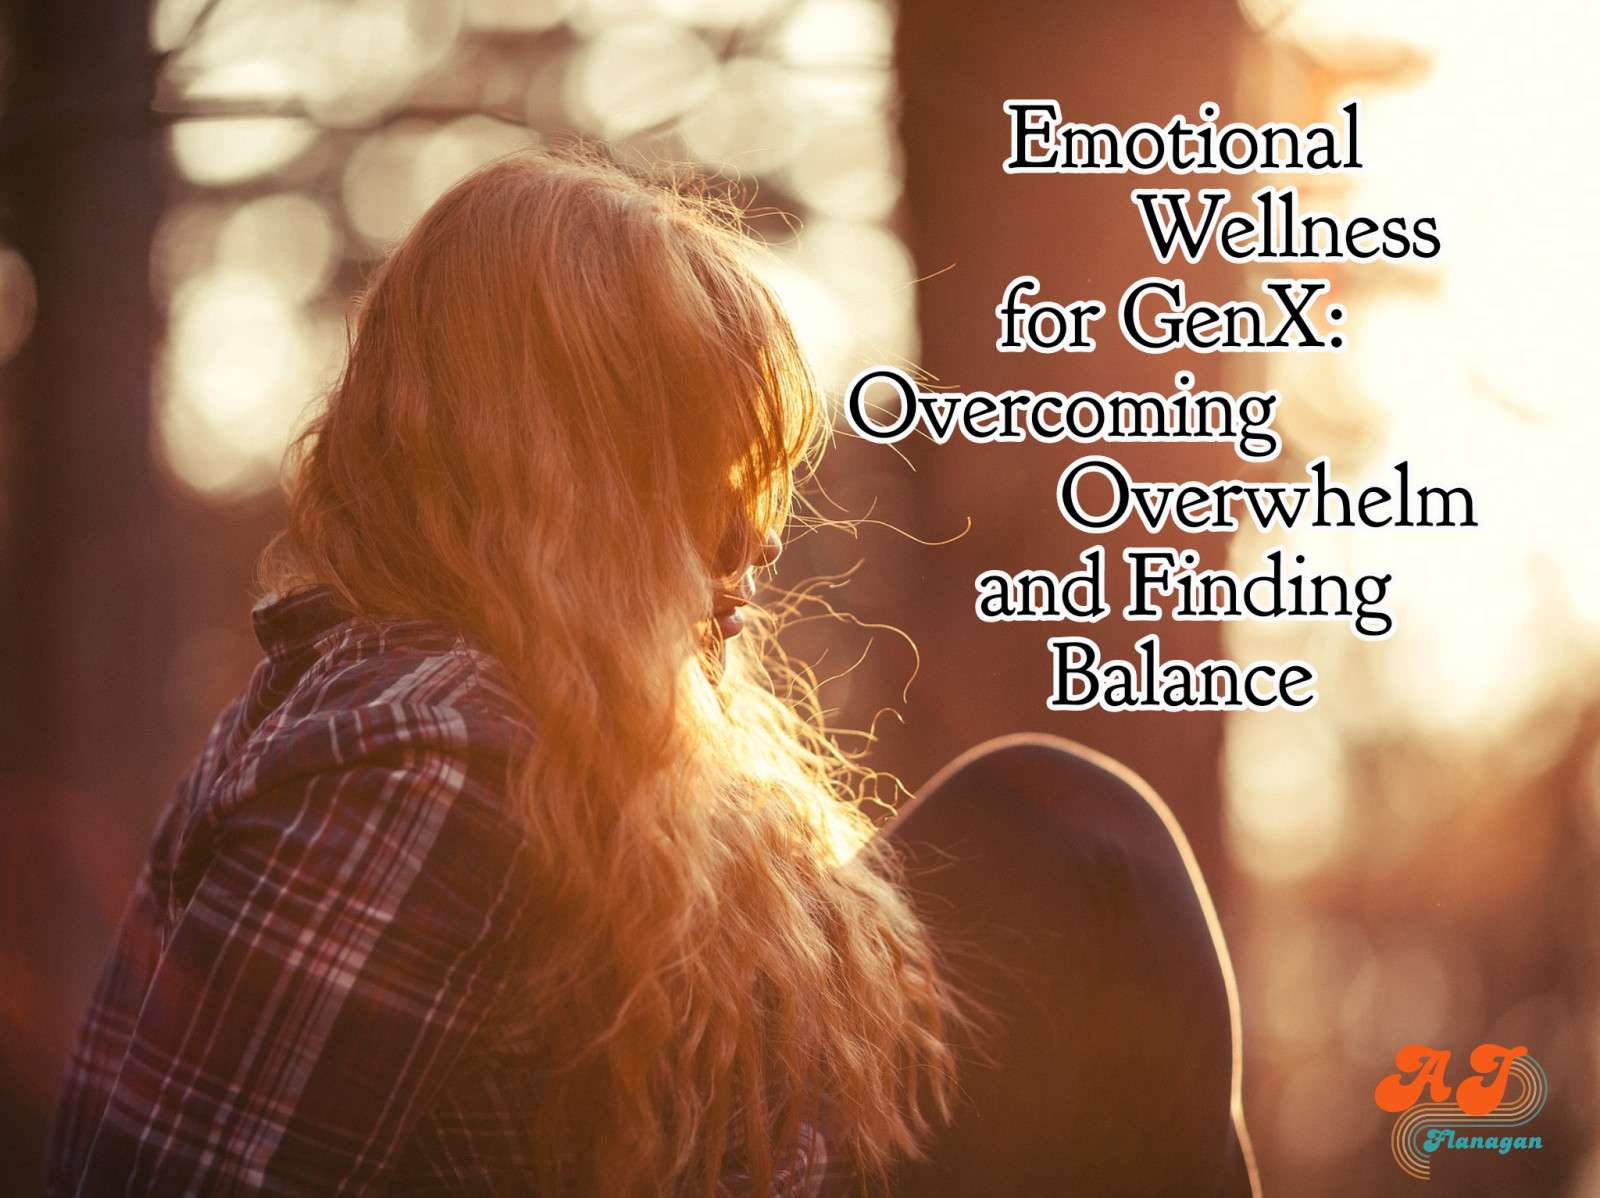 Emotional Wellness for GenX: Overcoming Overwhelm and Finding Balance